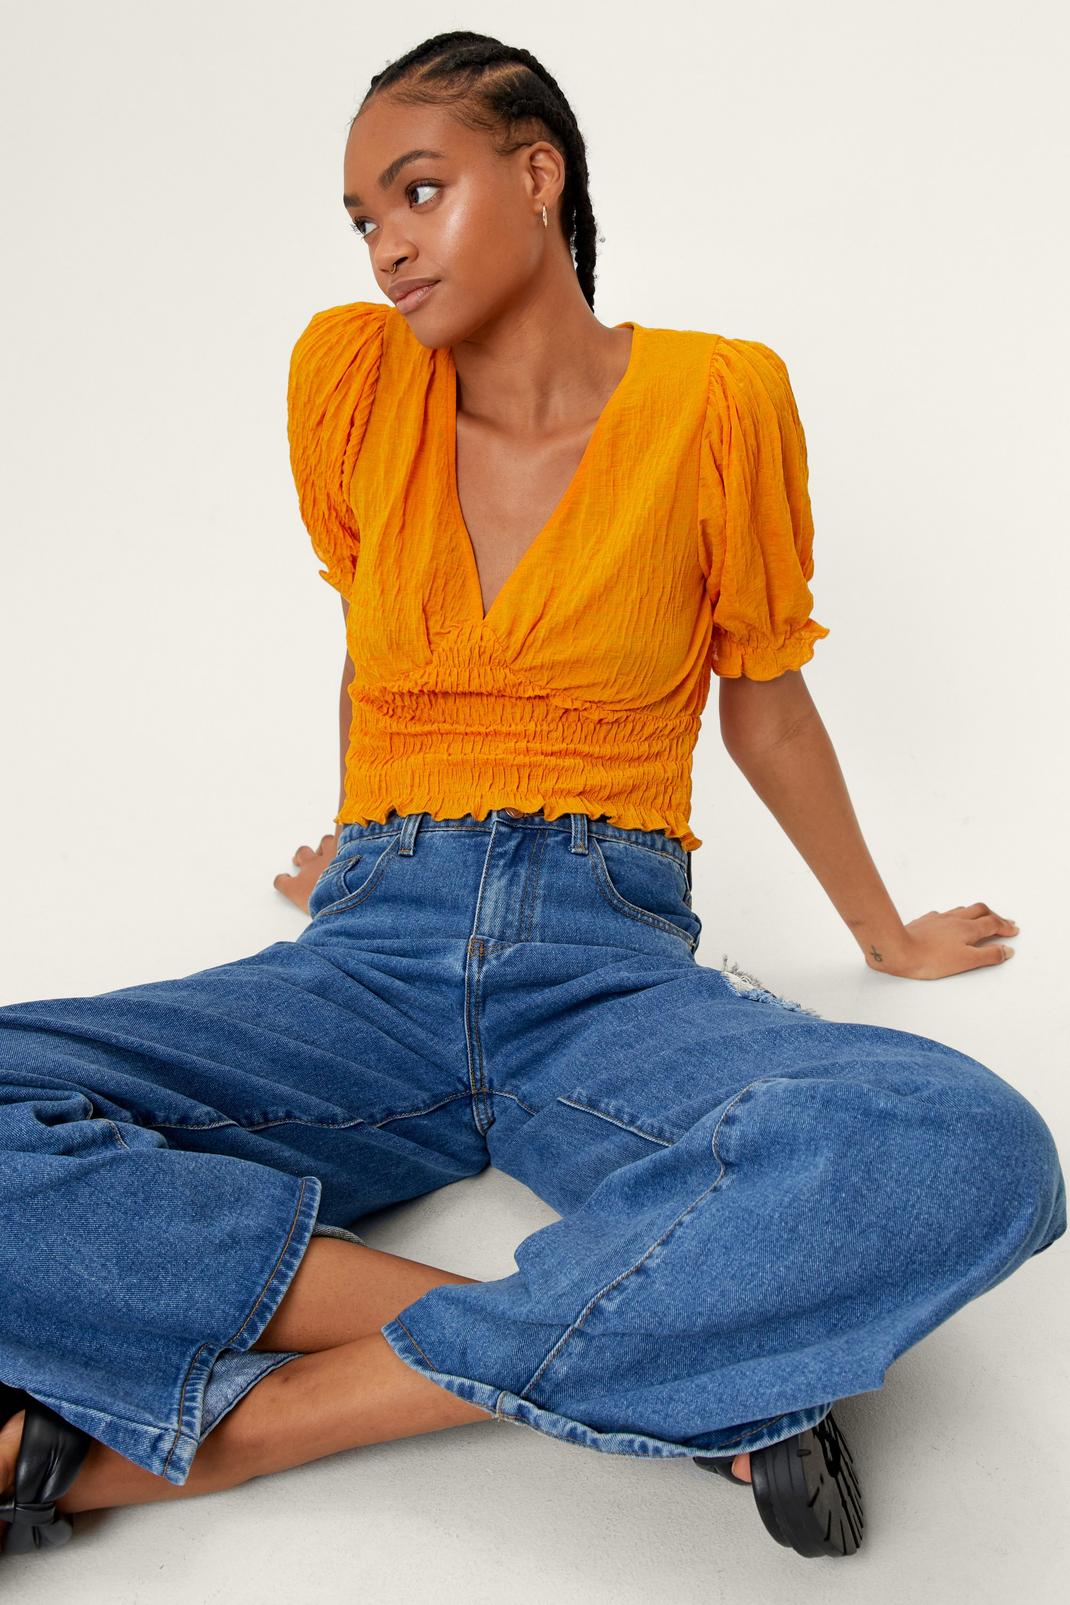 Women's Loose-fitting Crop Top - Long Puffy Sleeves and Straight